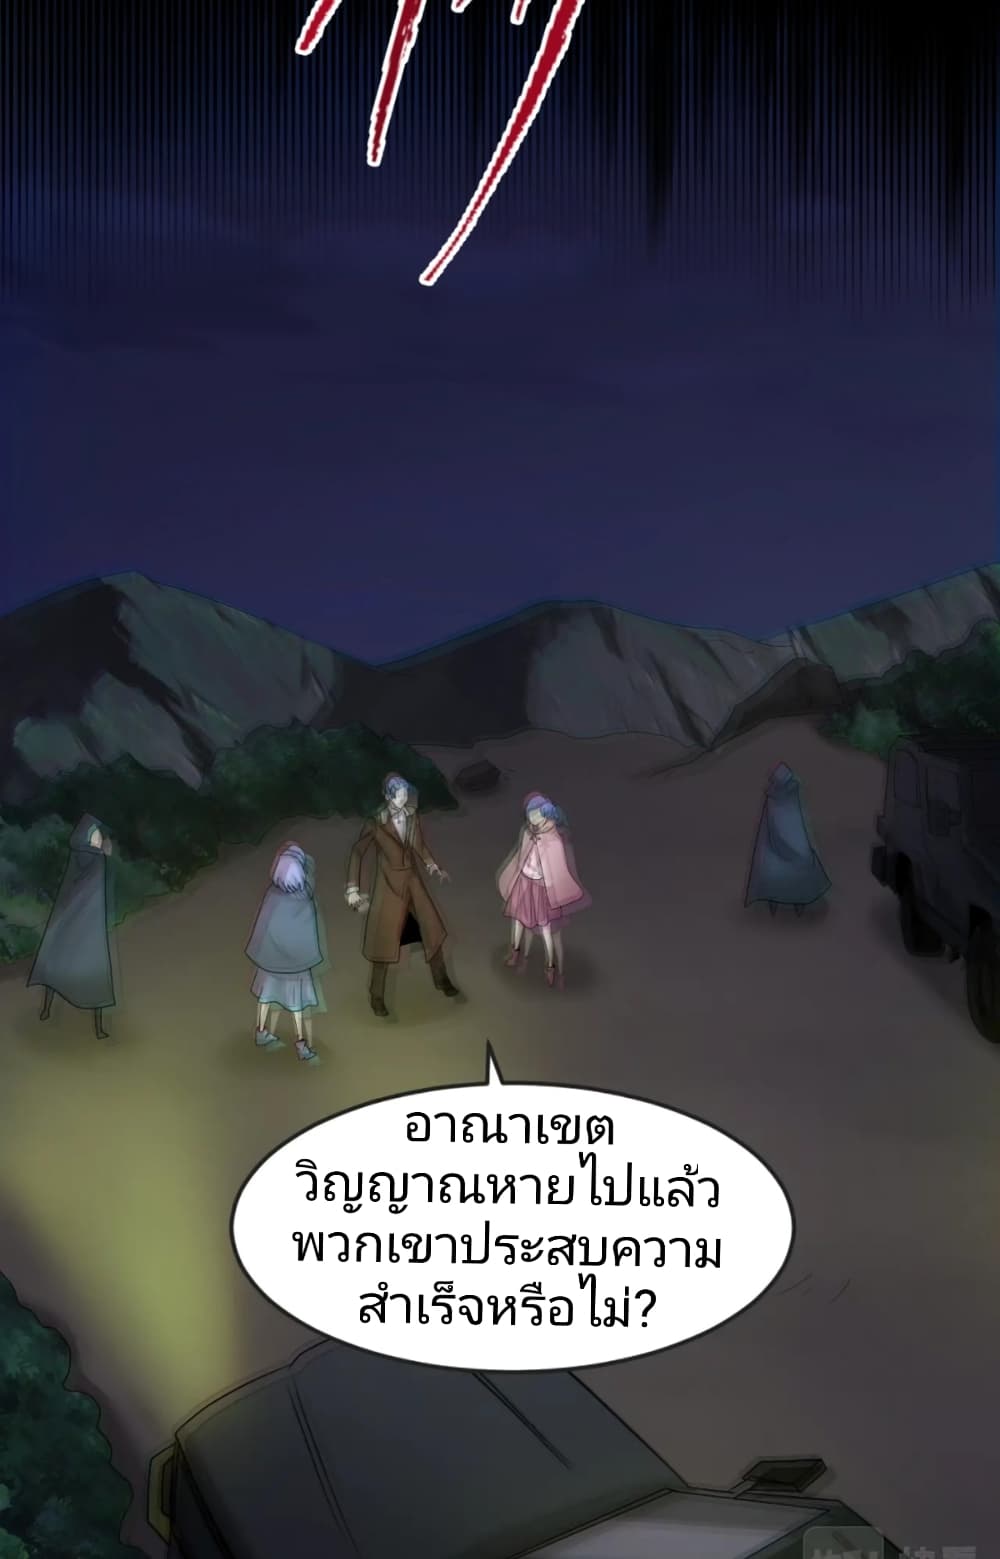 The Age of Ghost Spirits à¸à¸­à¸à¸à¸µà¹ 25 (38)